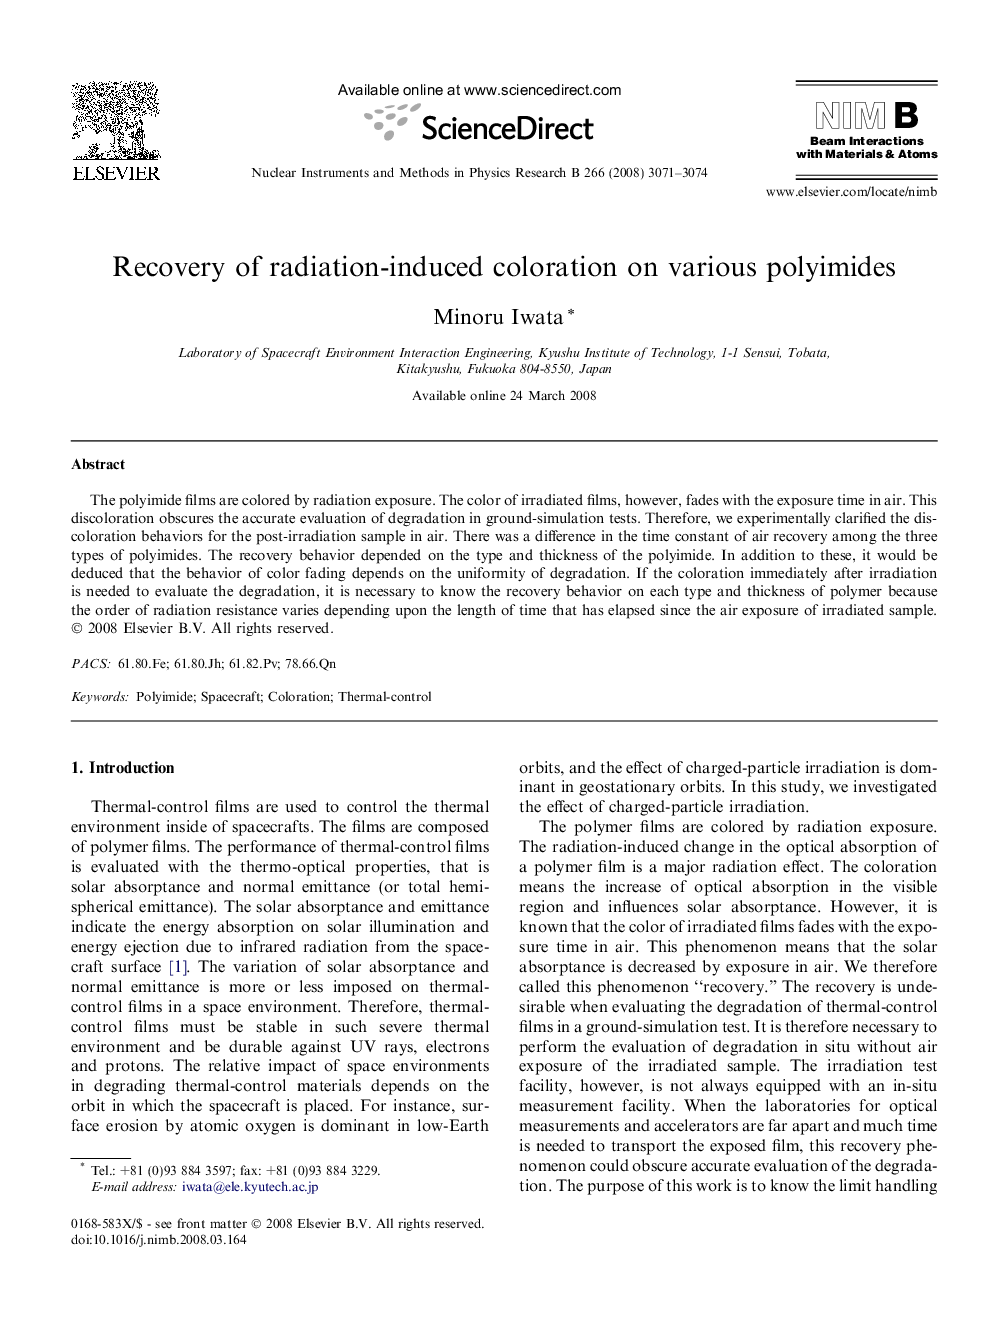 Recovery of radiation-induced coloration on various polyimides